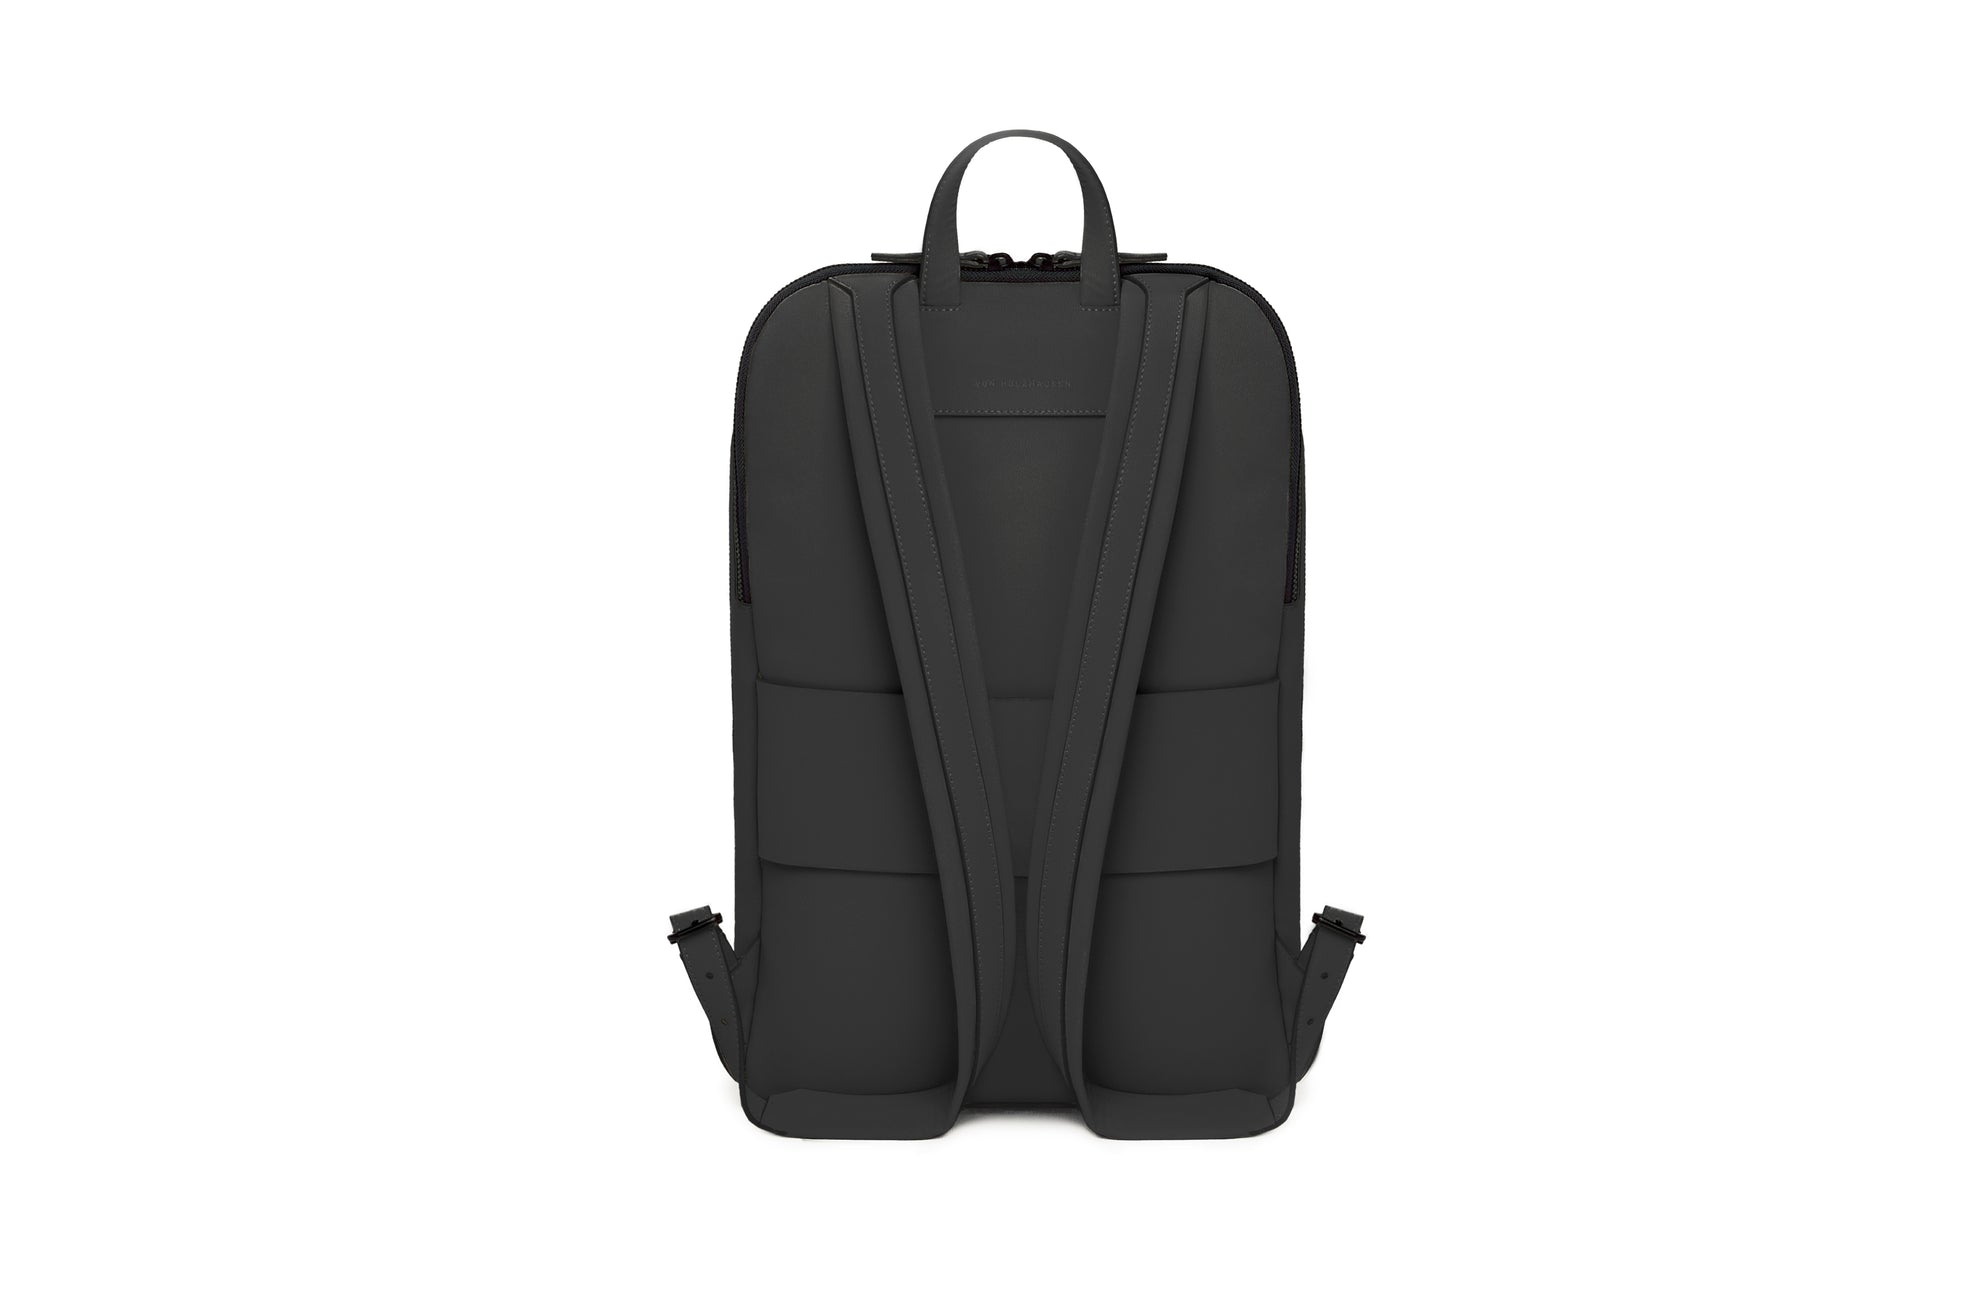 The Tech Backpack in Soft Leaf in Soft Leaf in Black image 2